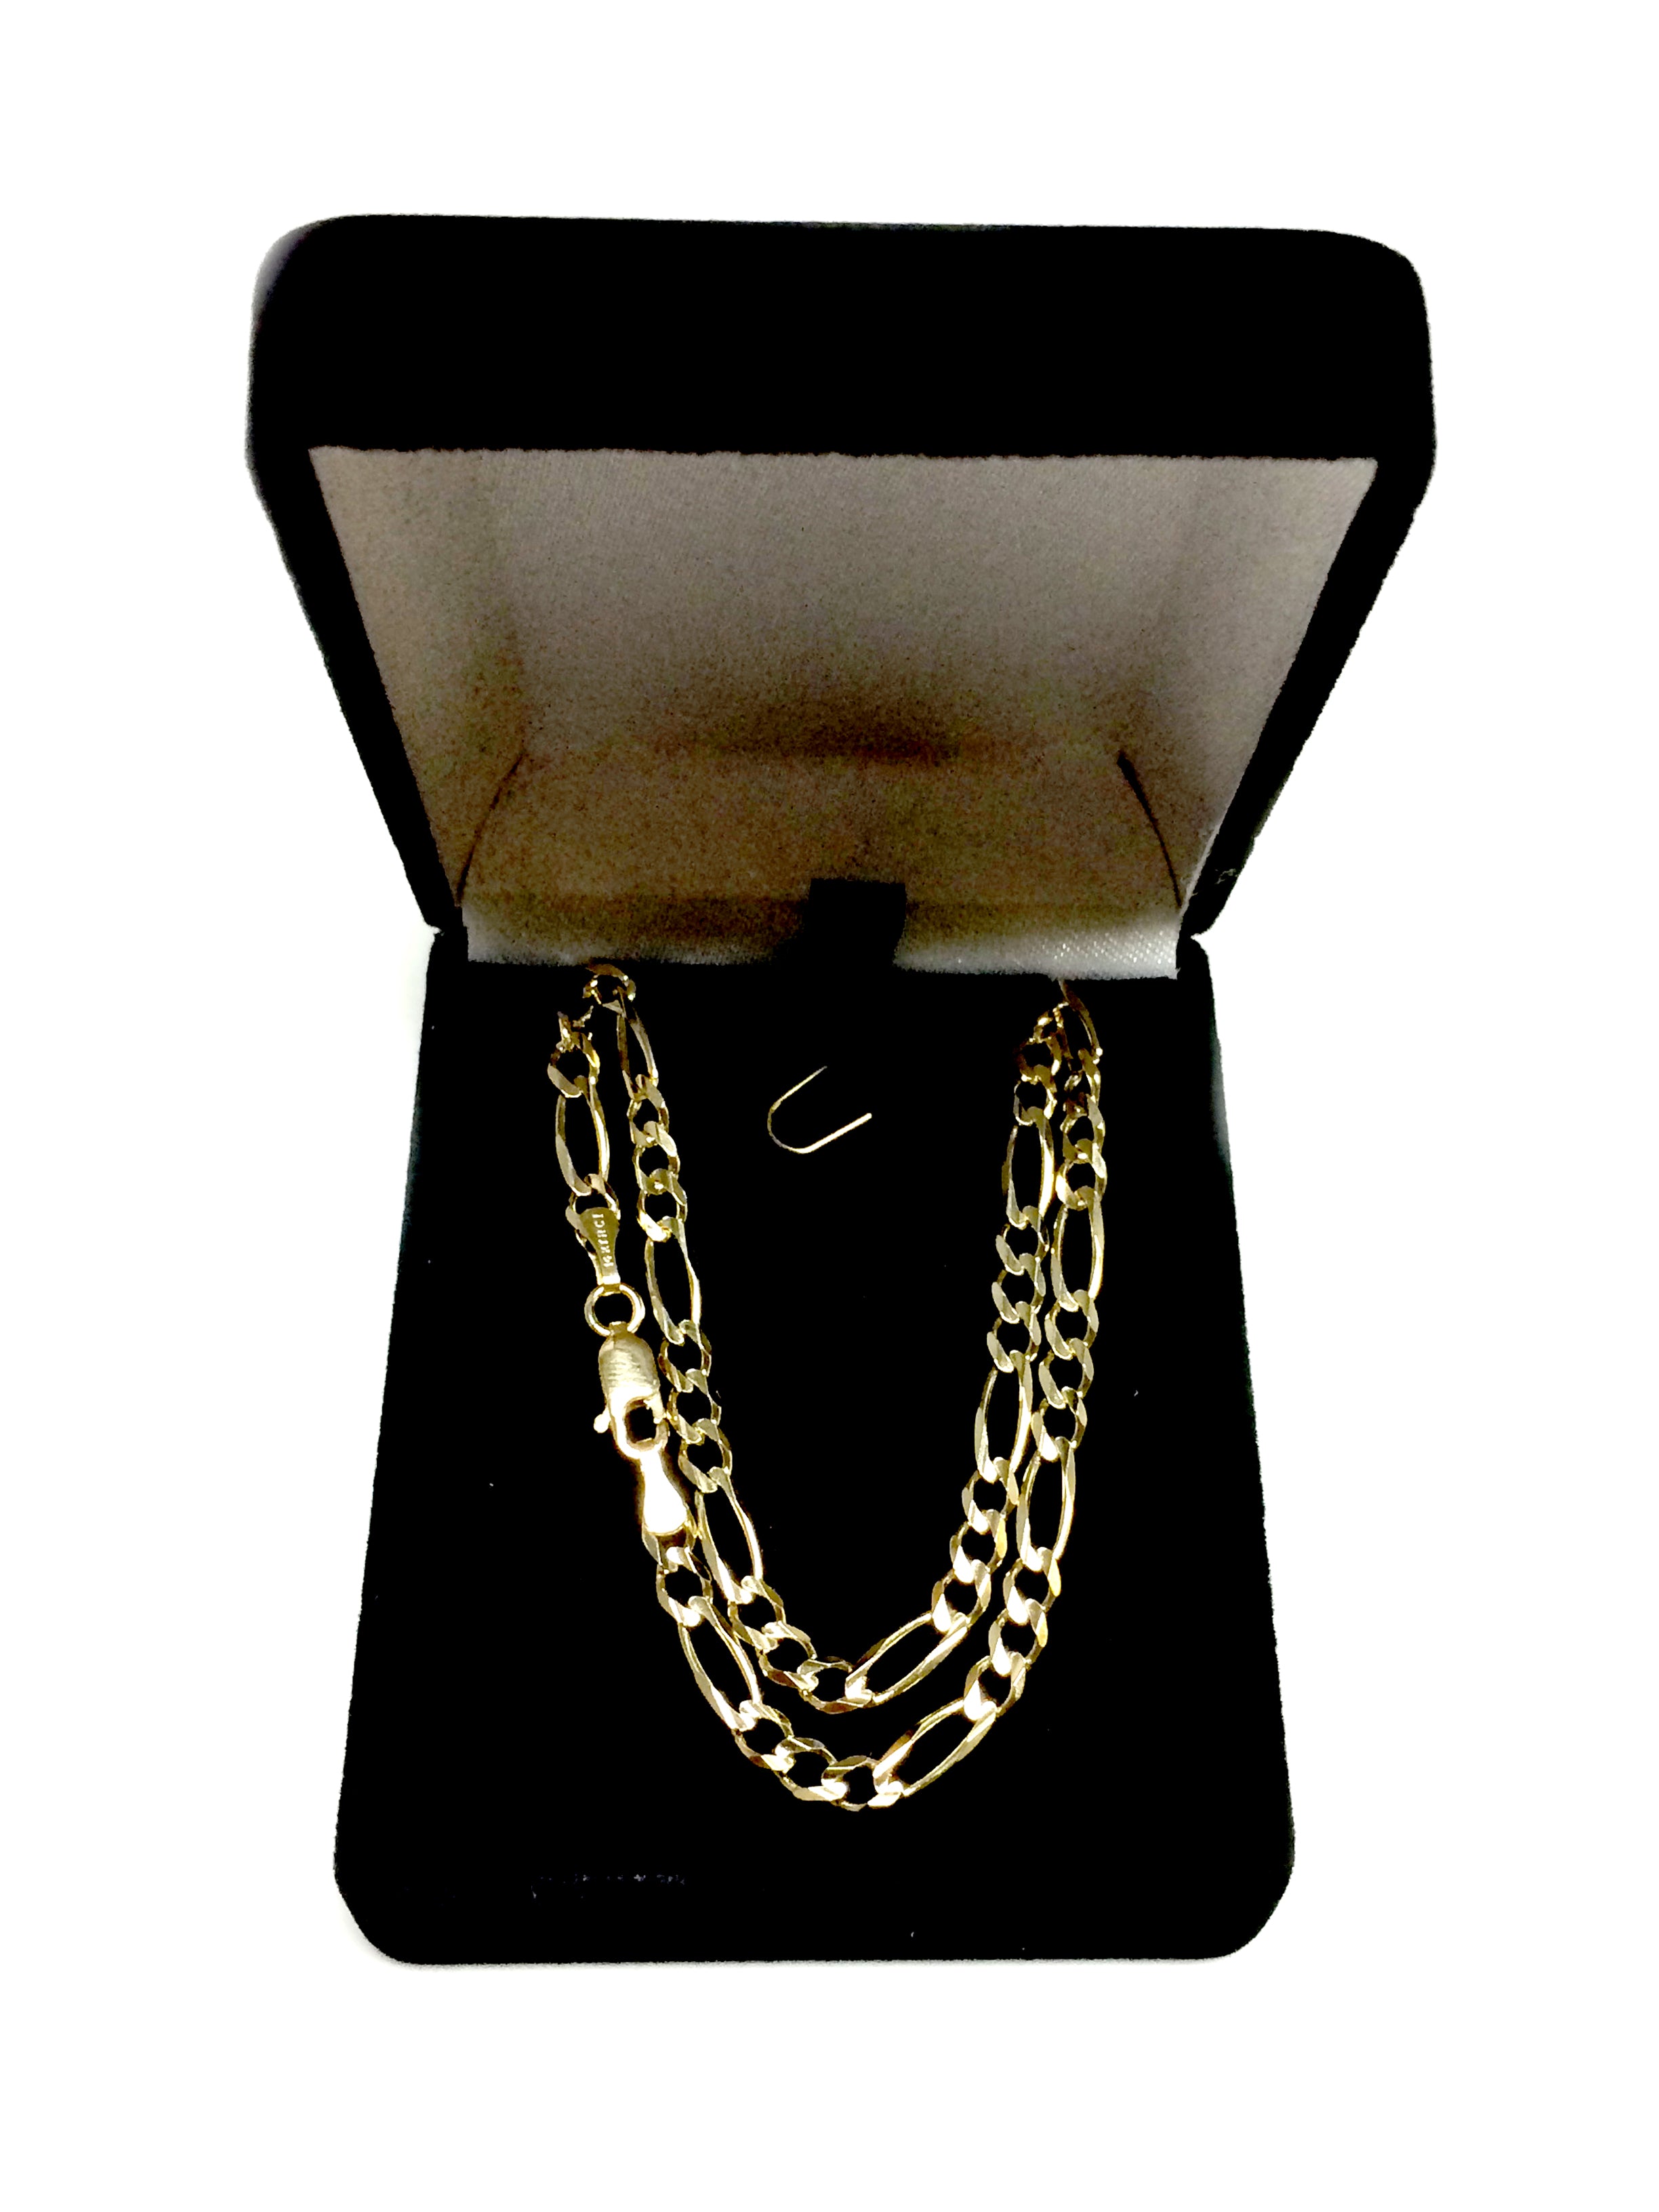 10k Yellow Solid Gold Figaro Chain Necklace, 4.0mm fine designer jewelry for men and women